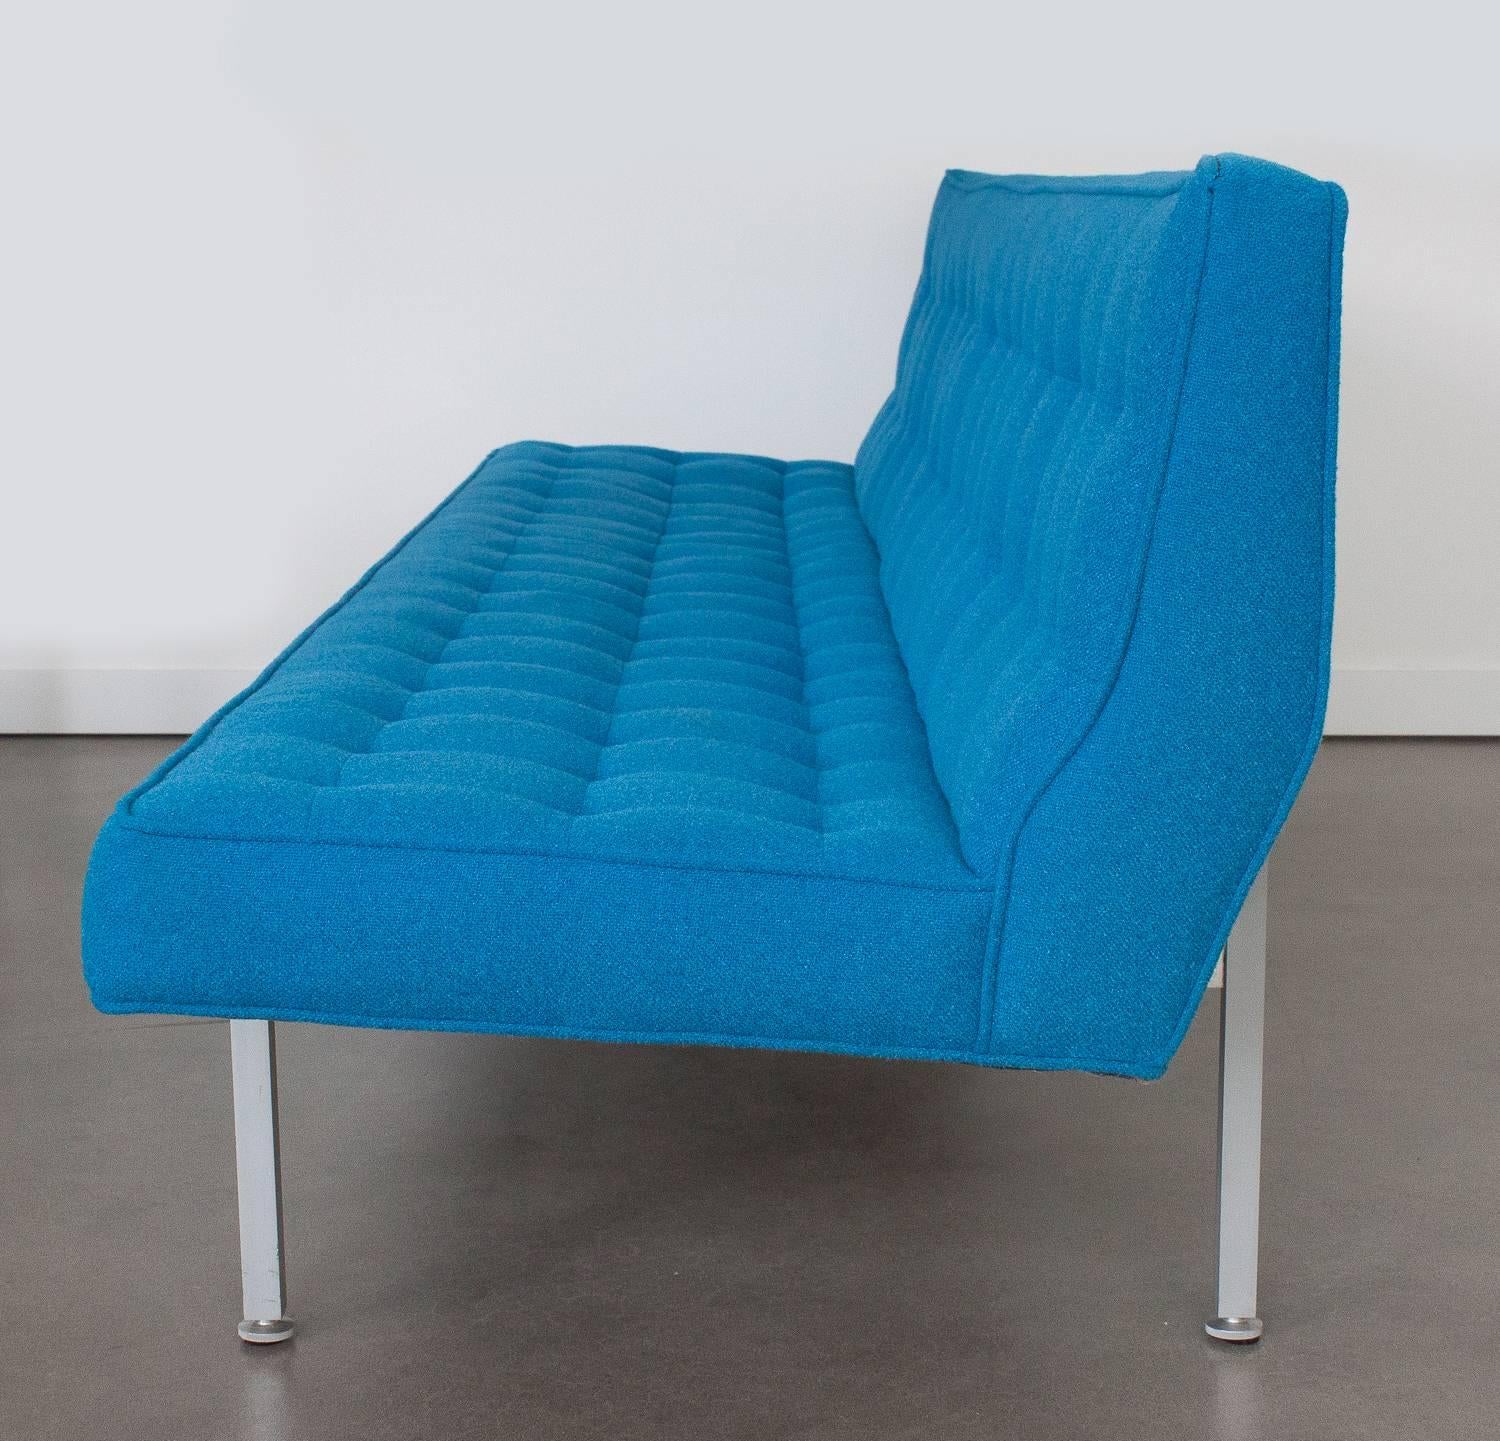 Late 20th Century Armless Aluminum Frame Sofa Attributed to Knoll